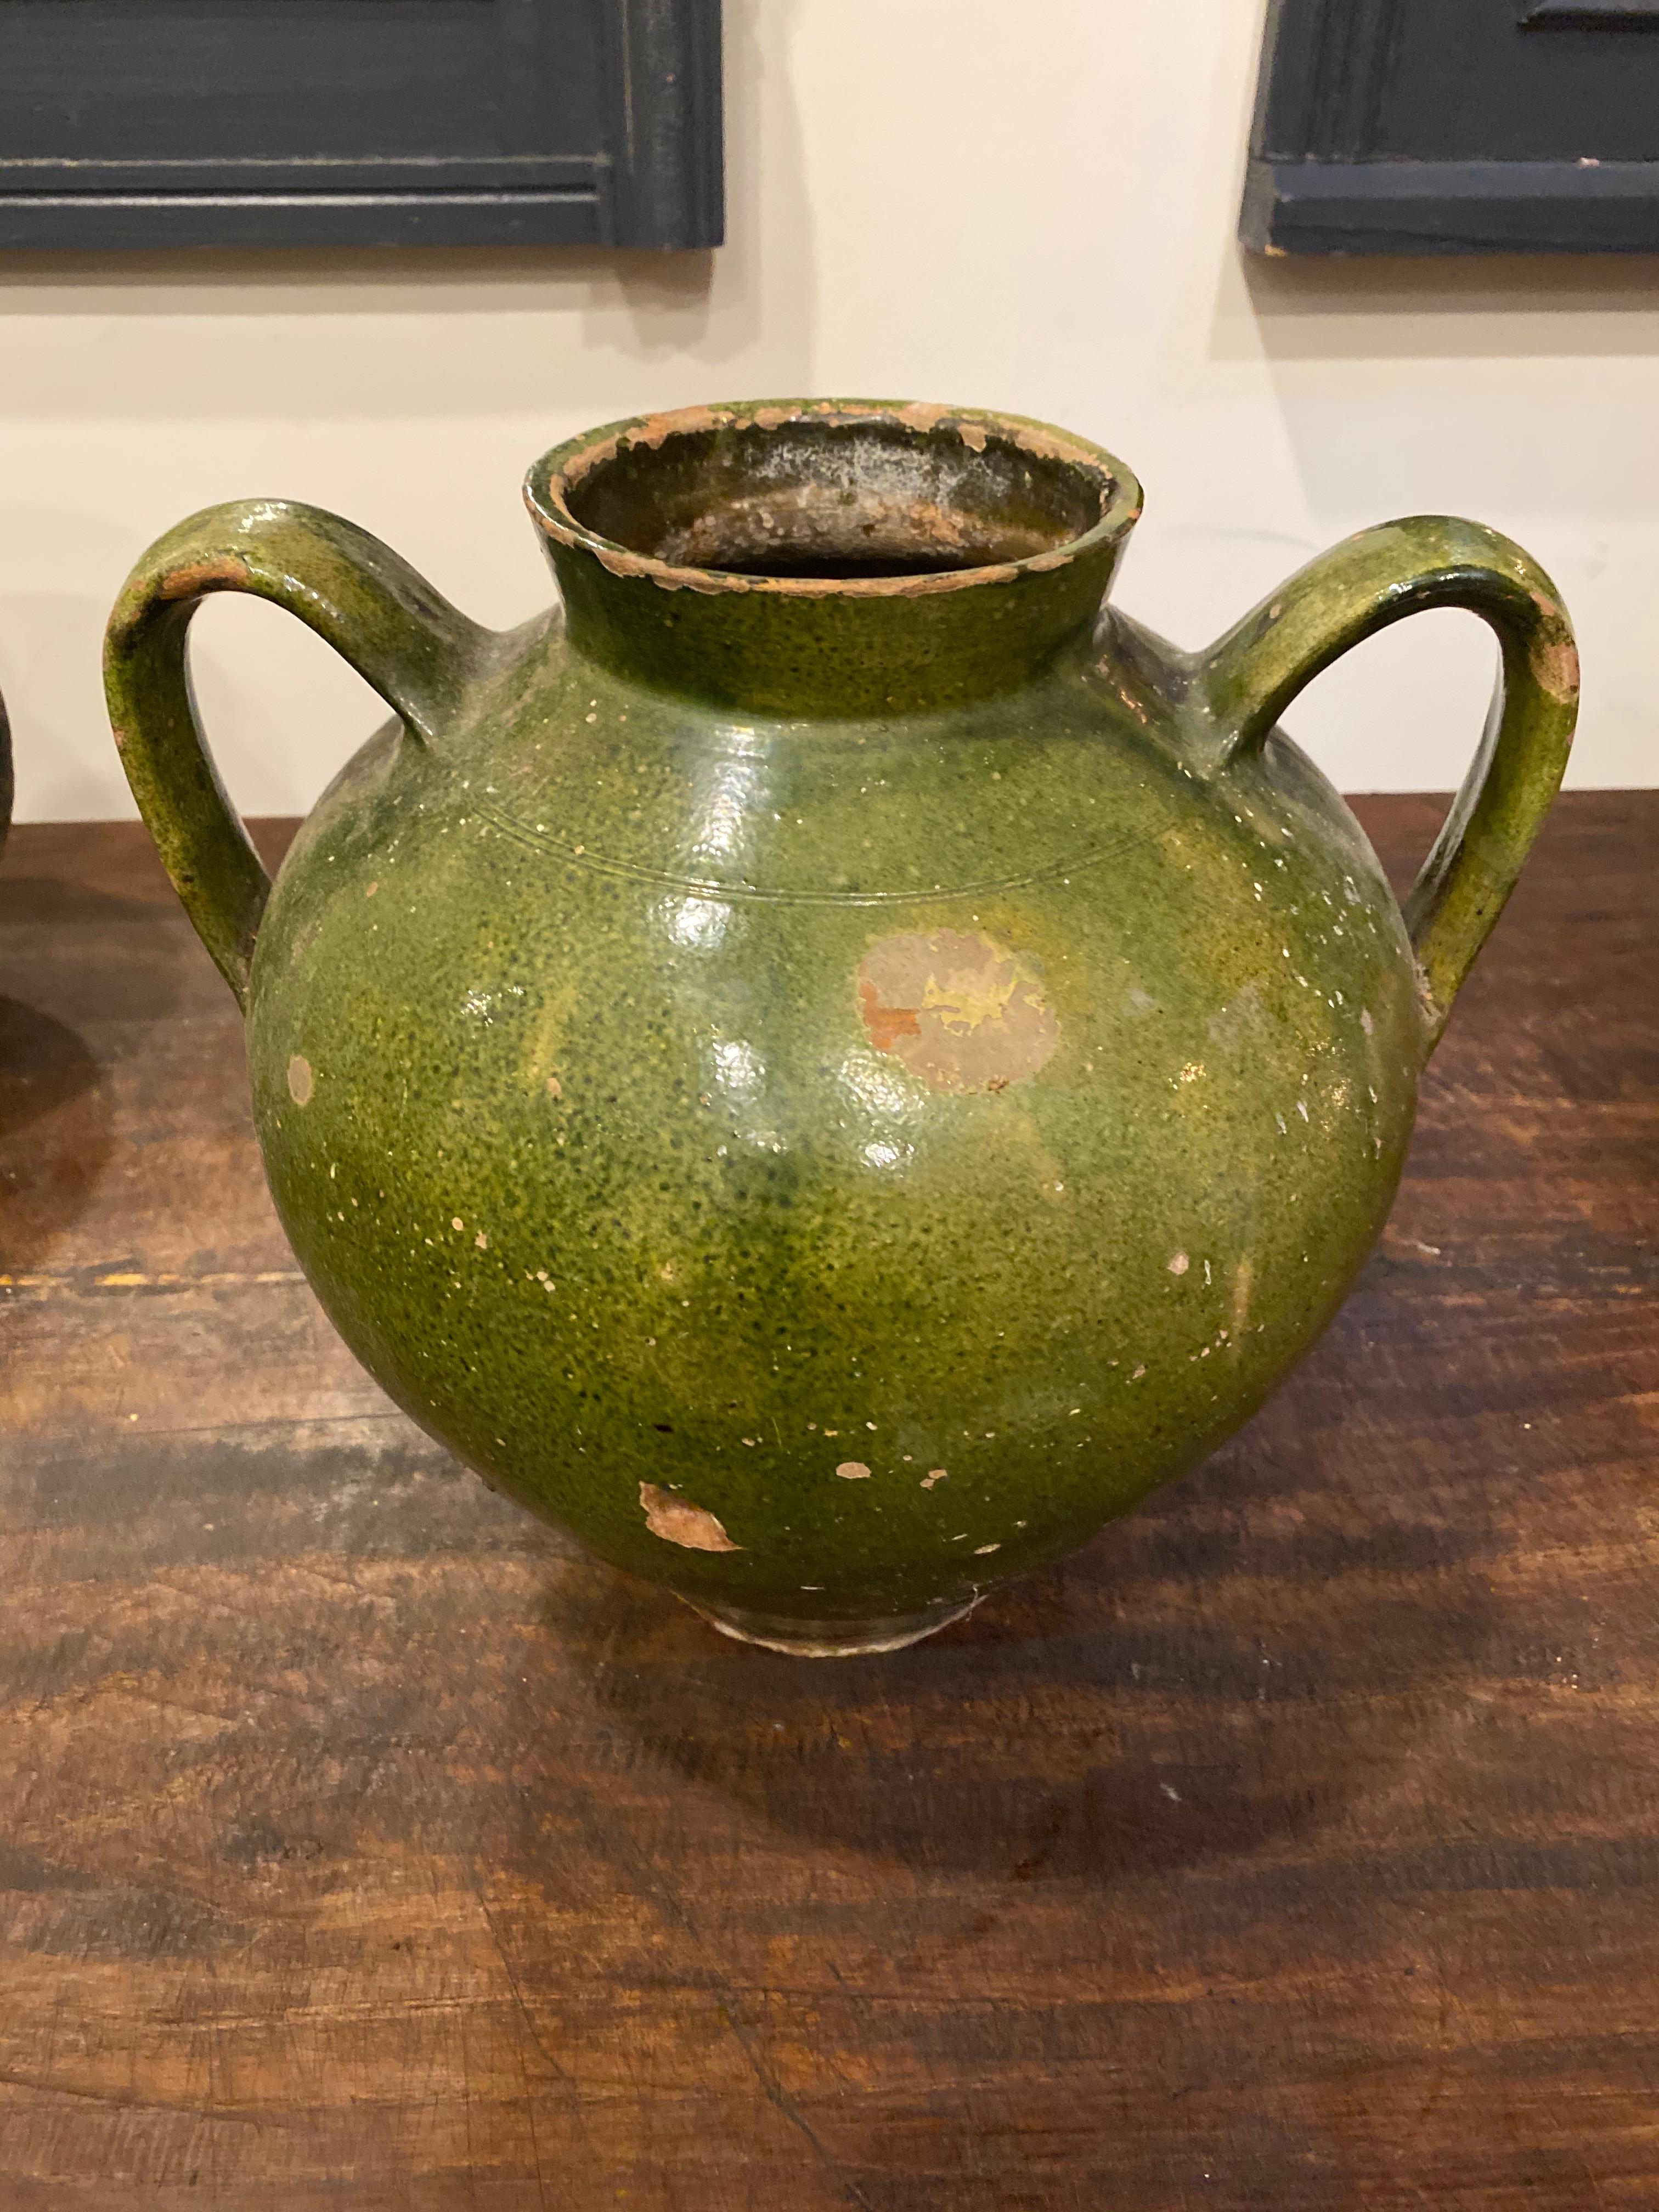 Handmade, vintage French stoneware pot that has been glazed in a rich forest green. Primarily used in food preparation as a confit pot before refrigeration.